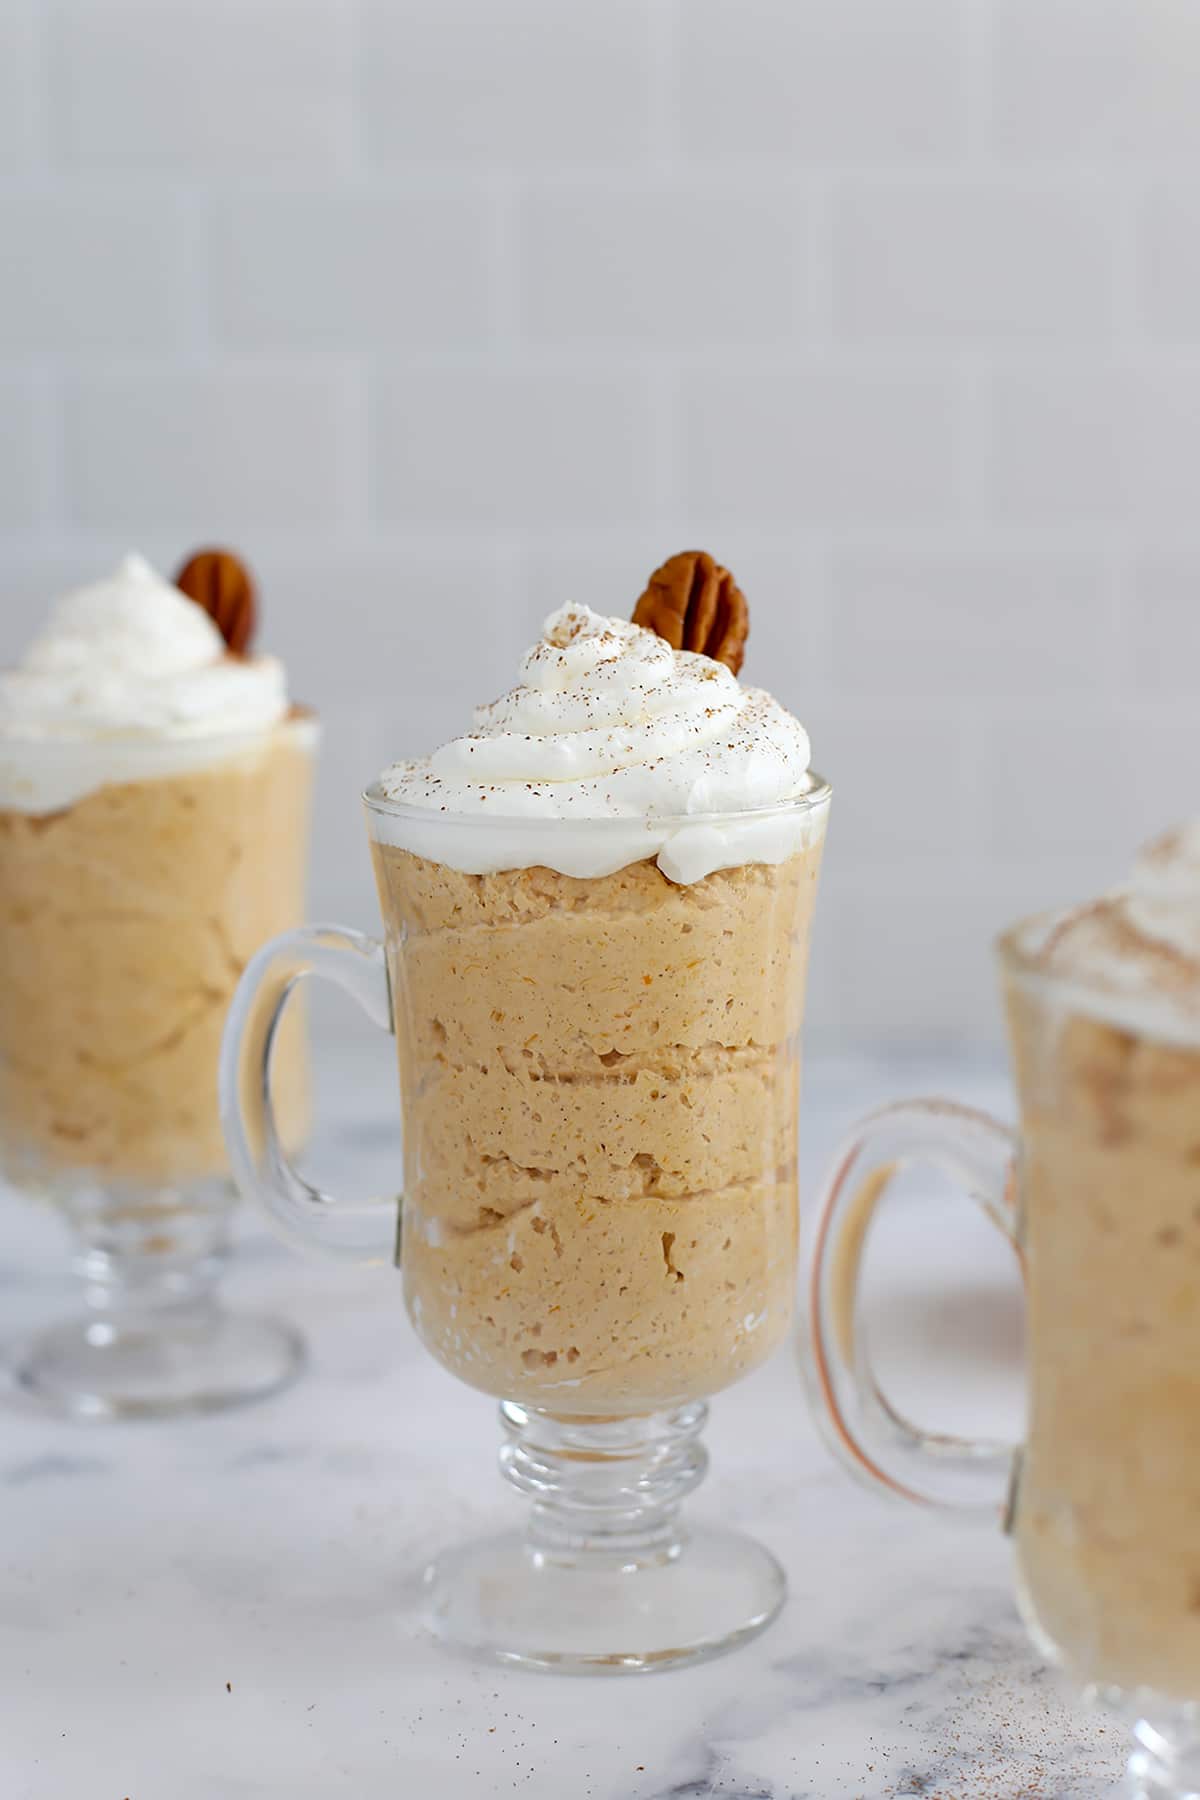 A glass serving mug filled with pumpkin mousse and topped with whipped cream and a pecan.